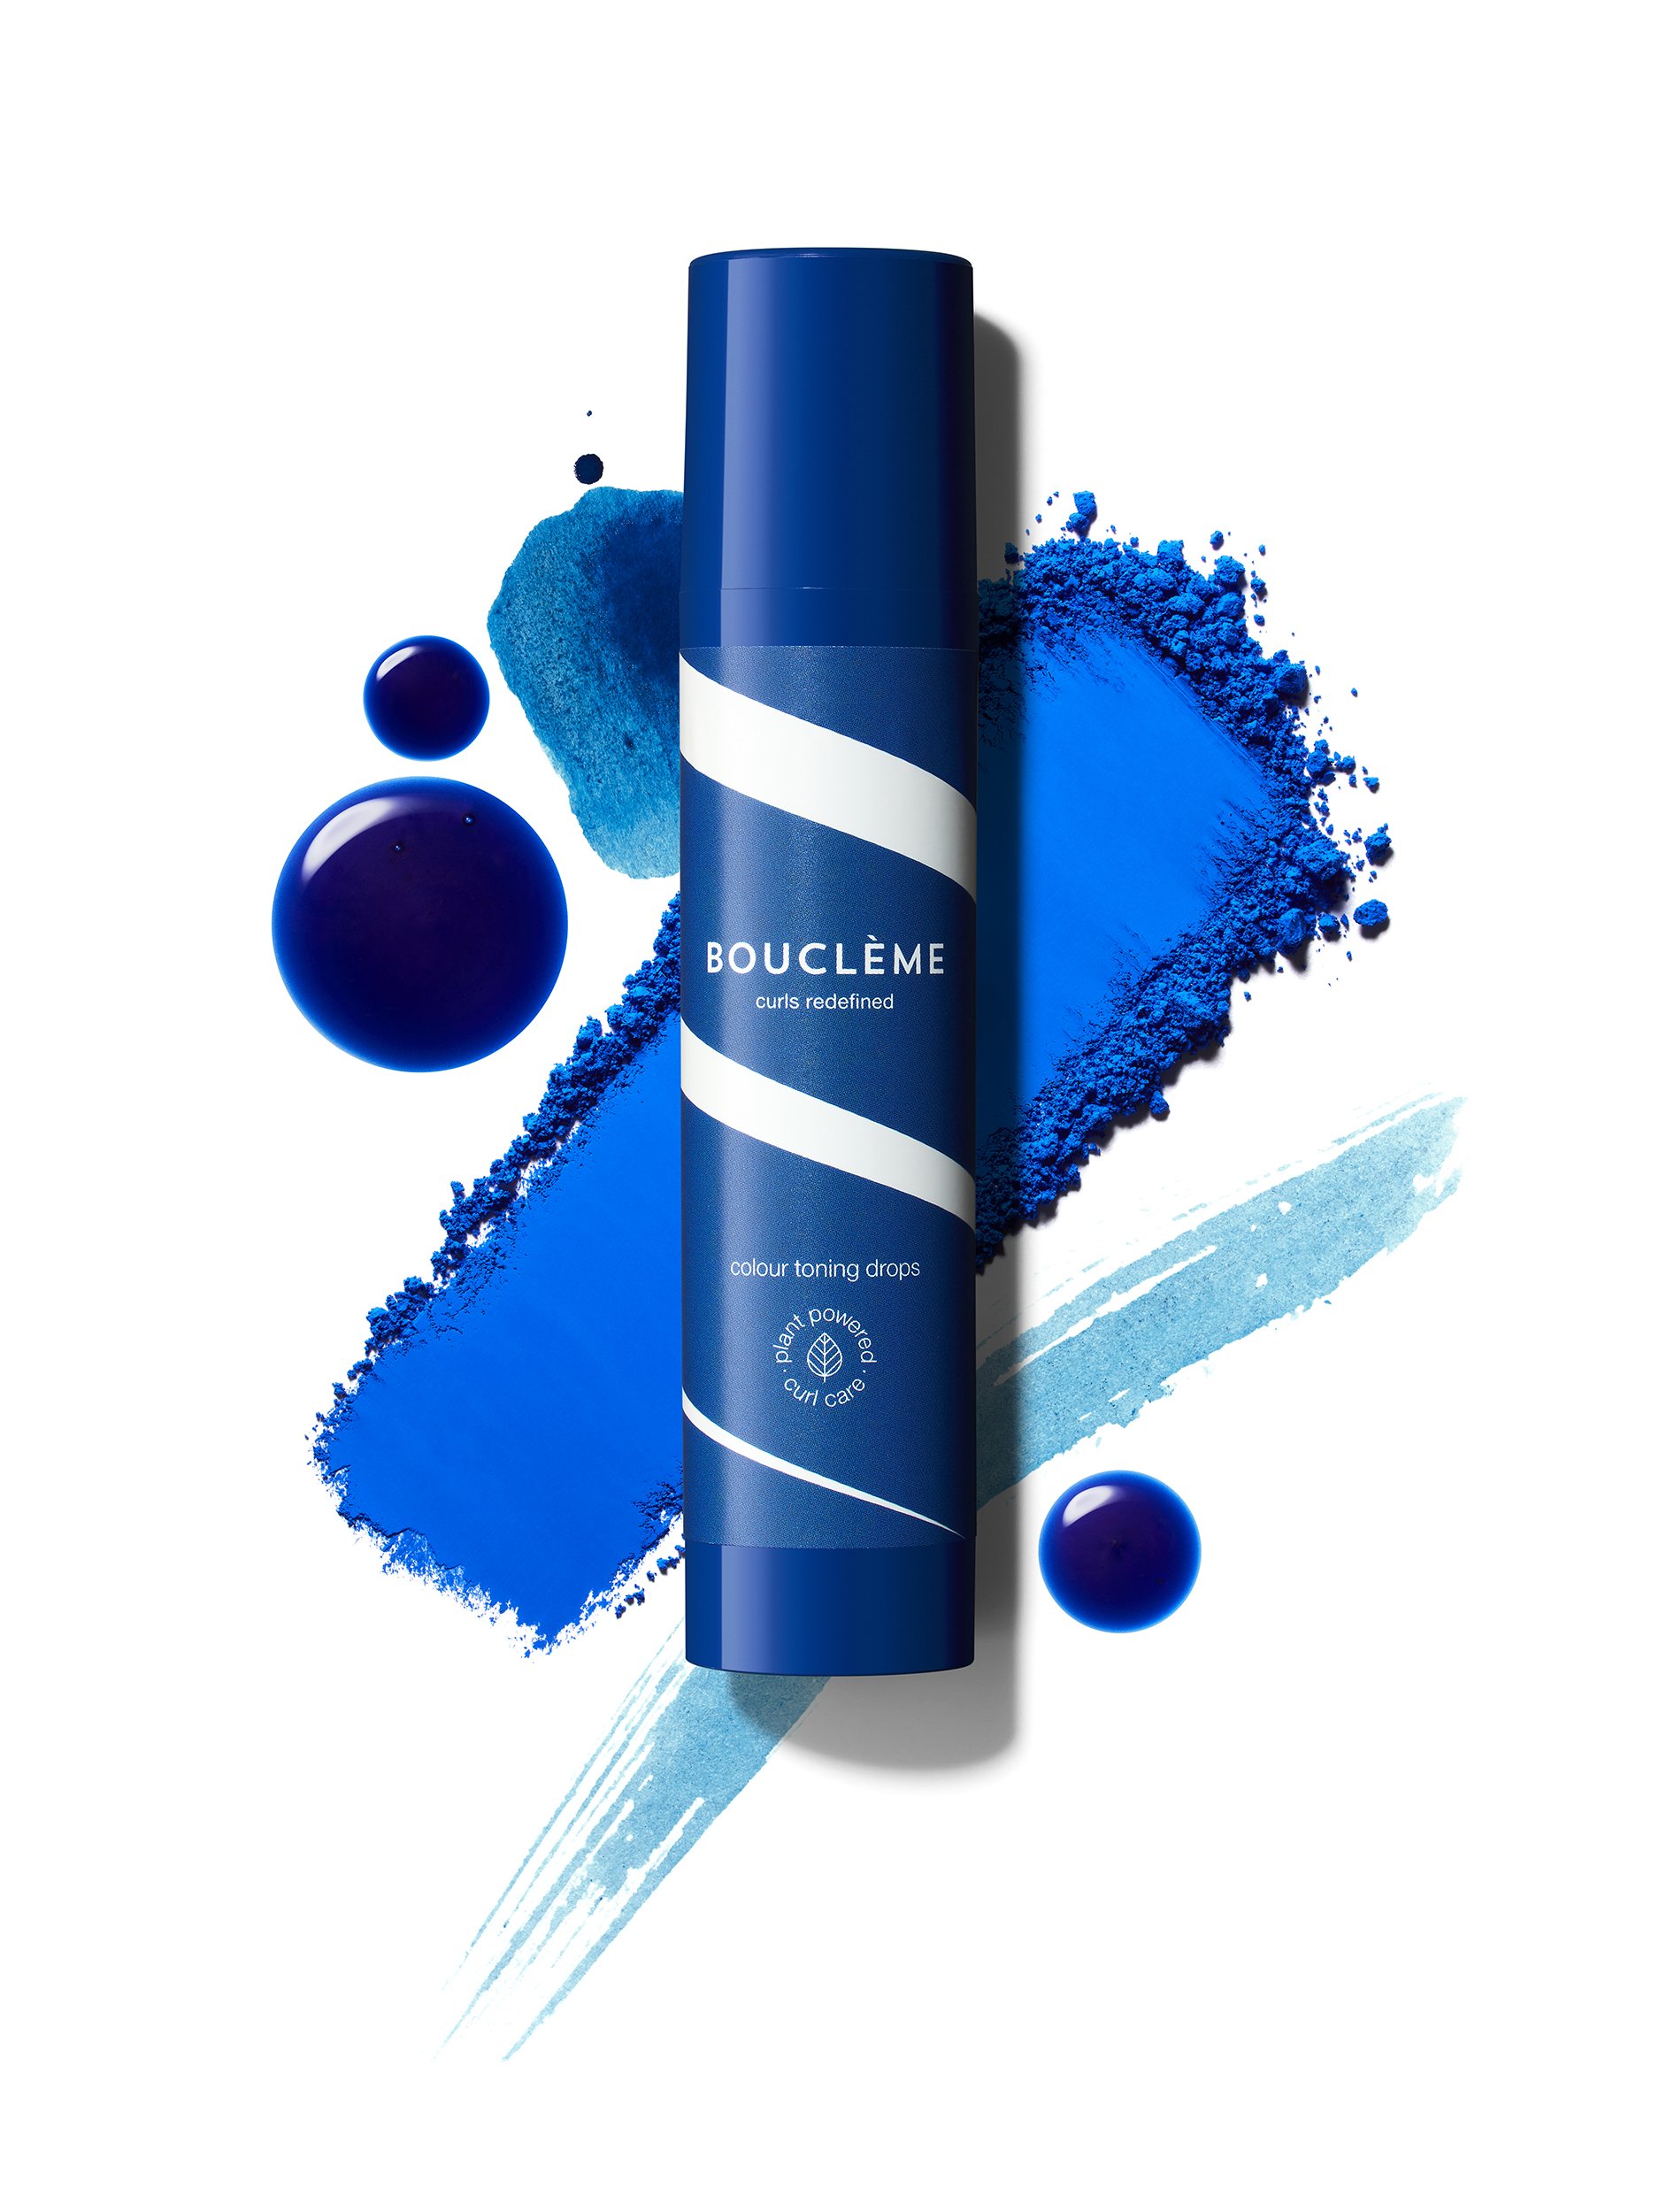 Boucleme colour toning drops - product photography by London-based Simon Lyle Ritchie